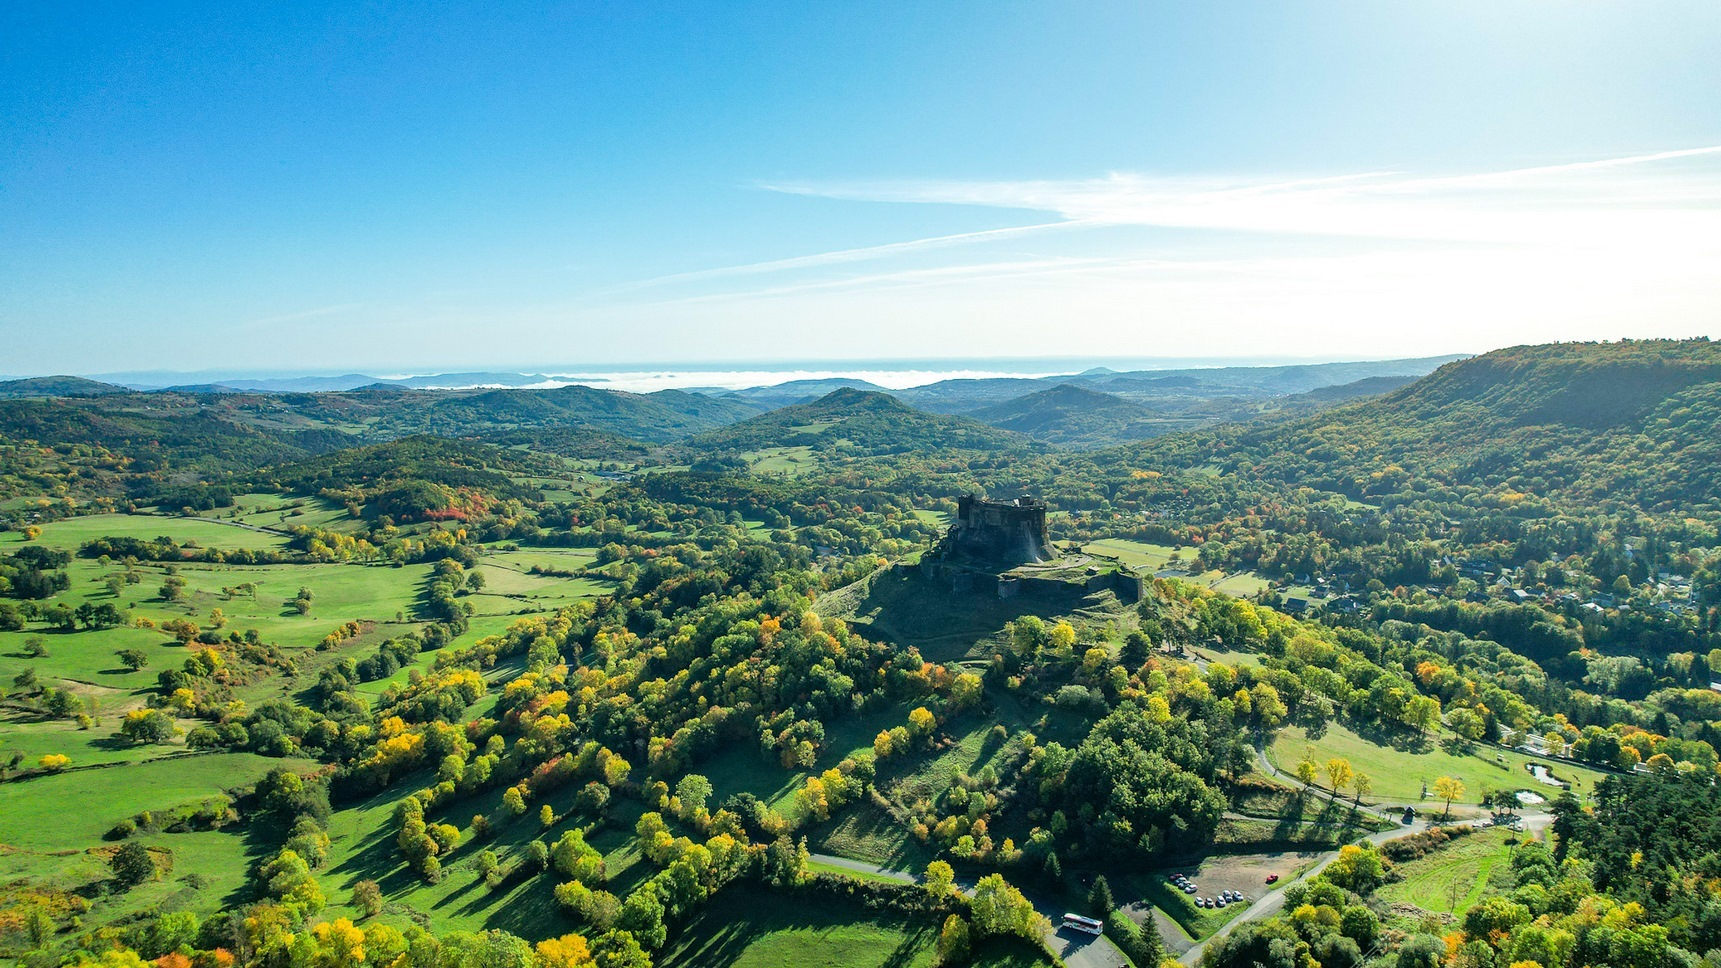 The castle of Murol on its rocky promontory dominates the Auvergne countryside